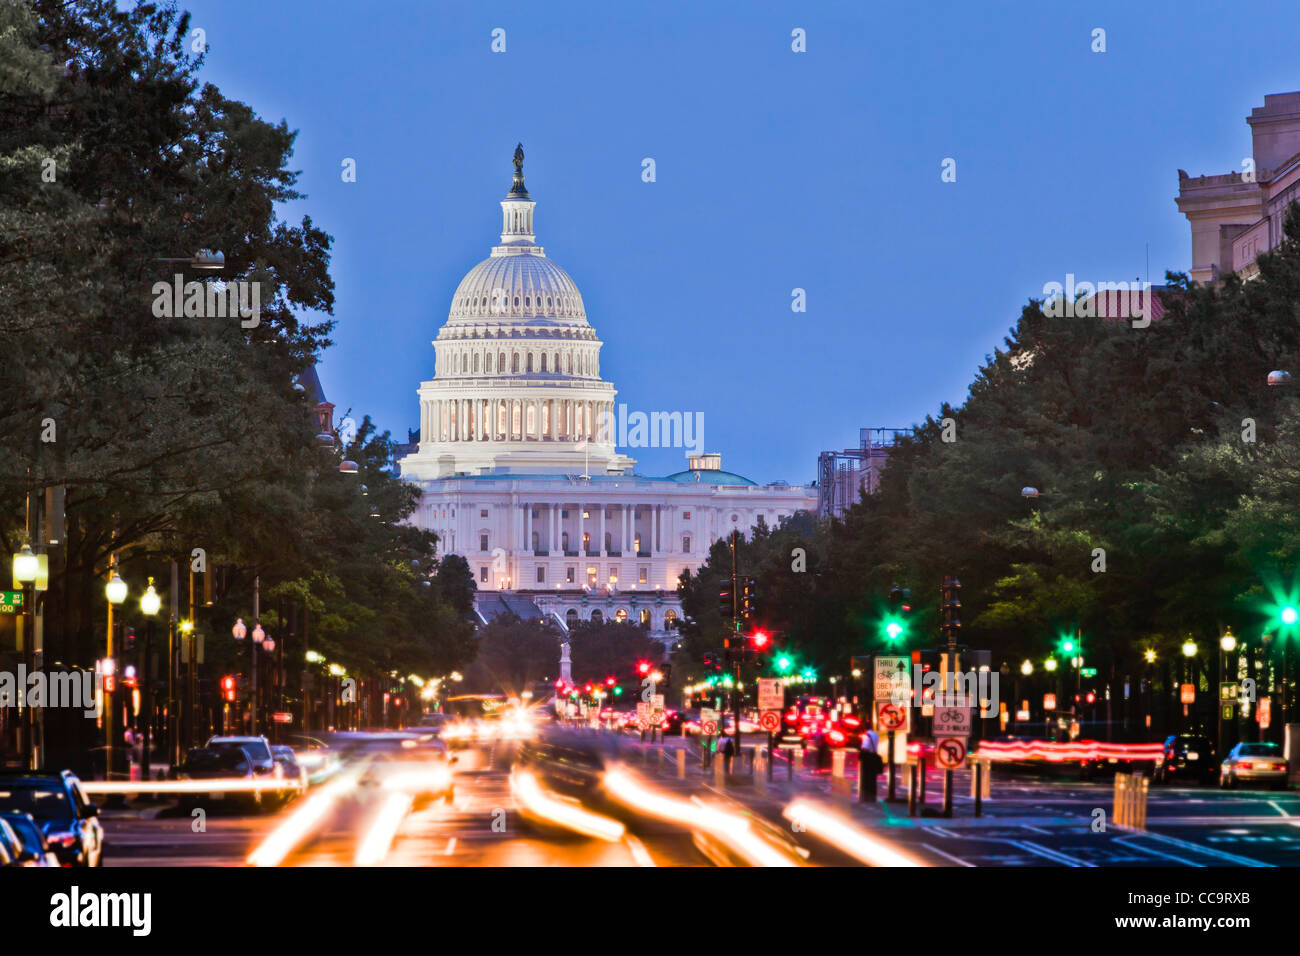 US Capitol building in early evening from street level - Washington, DC USA Stock Photo